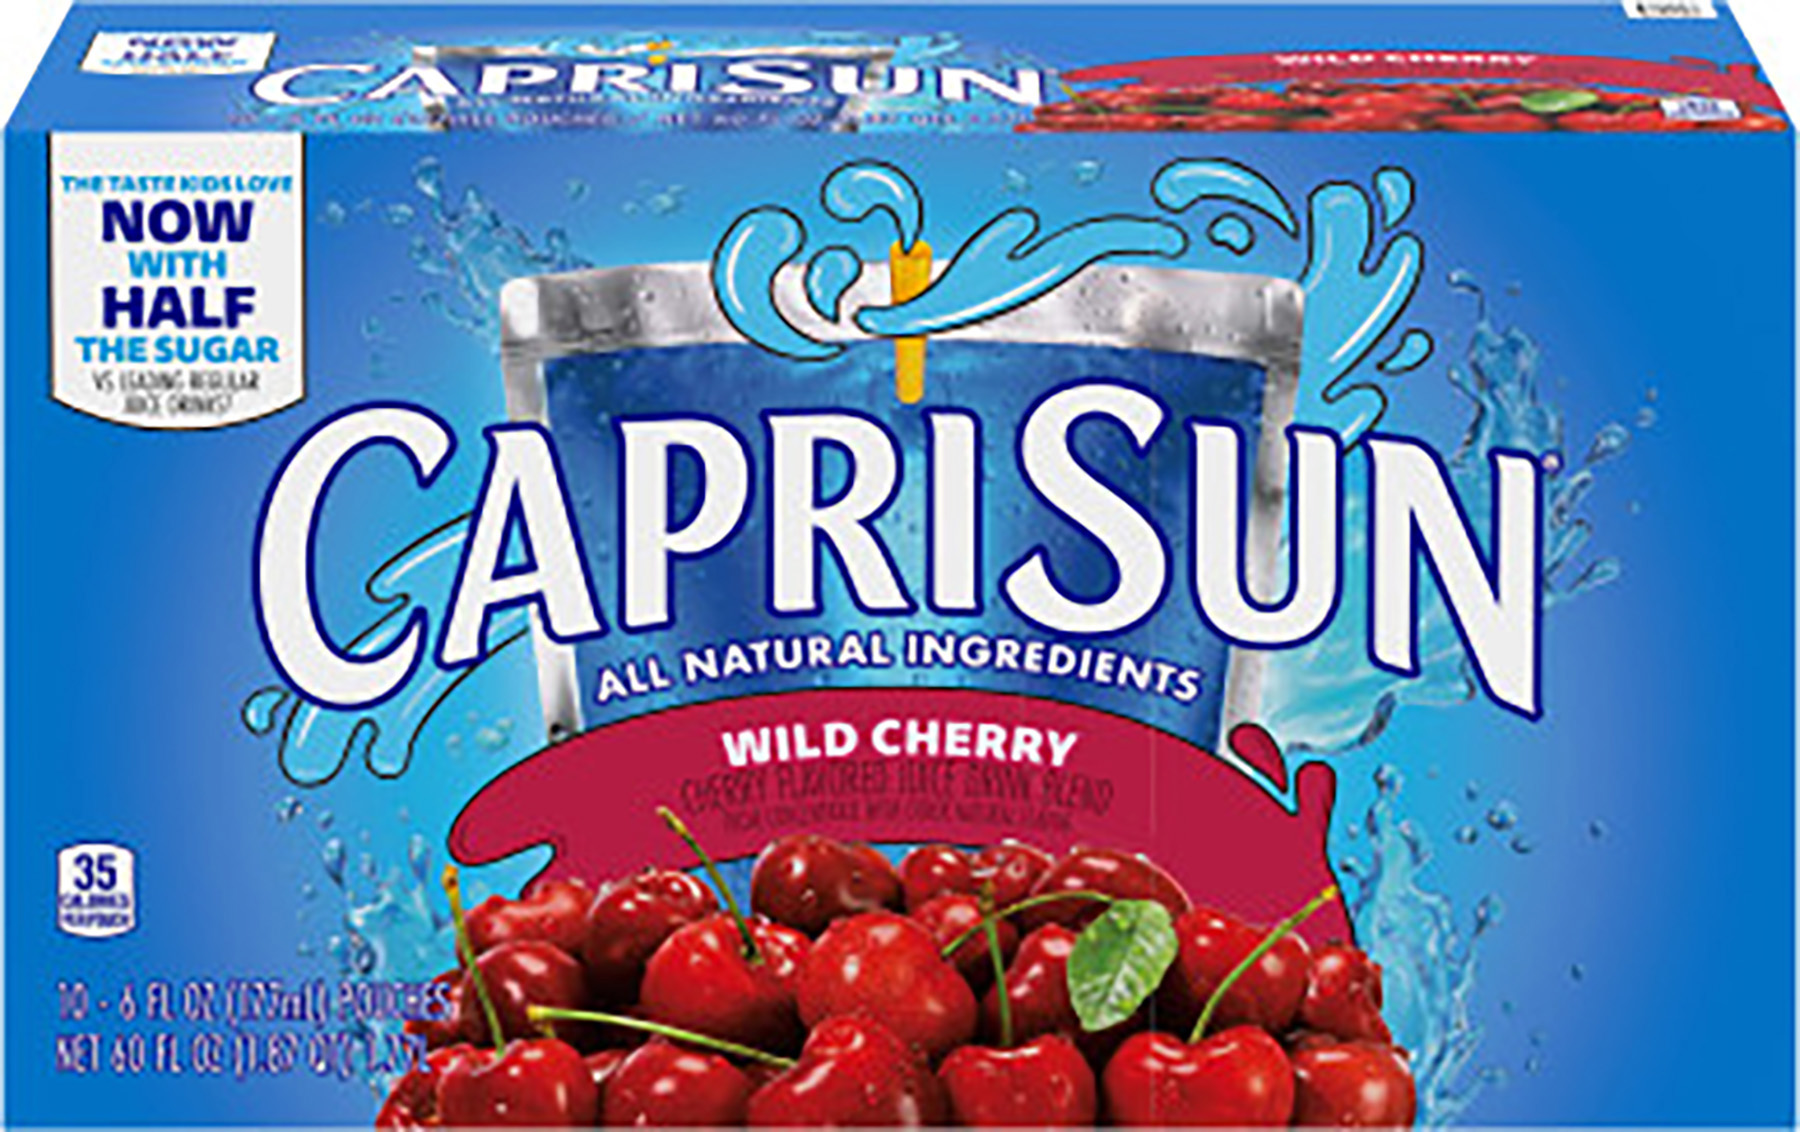 5,760 cases of Capri Sun have been recalled after being contaminated with cleaning solution